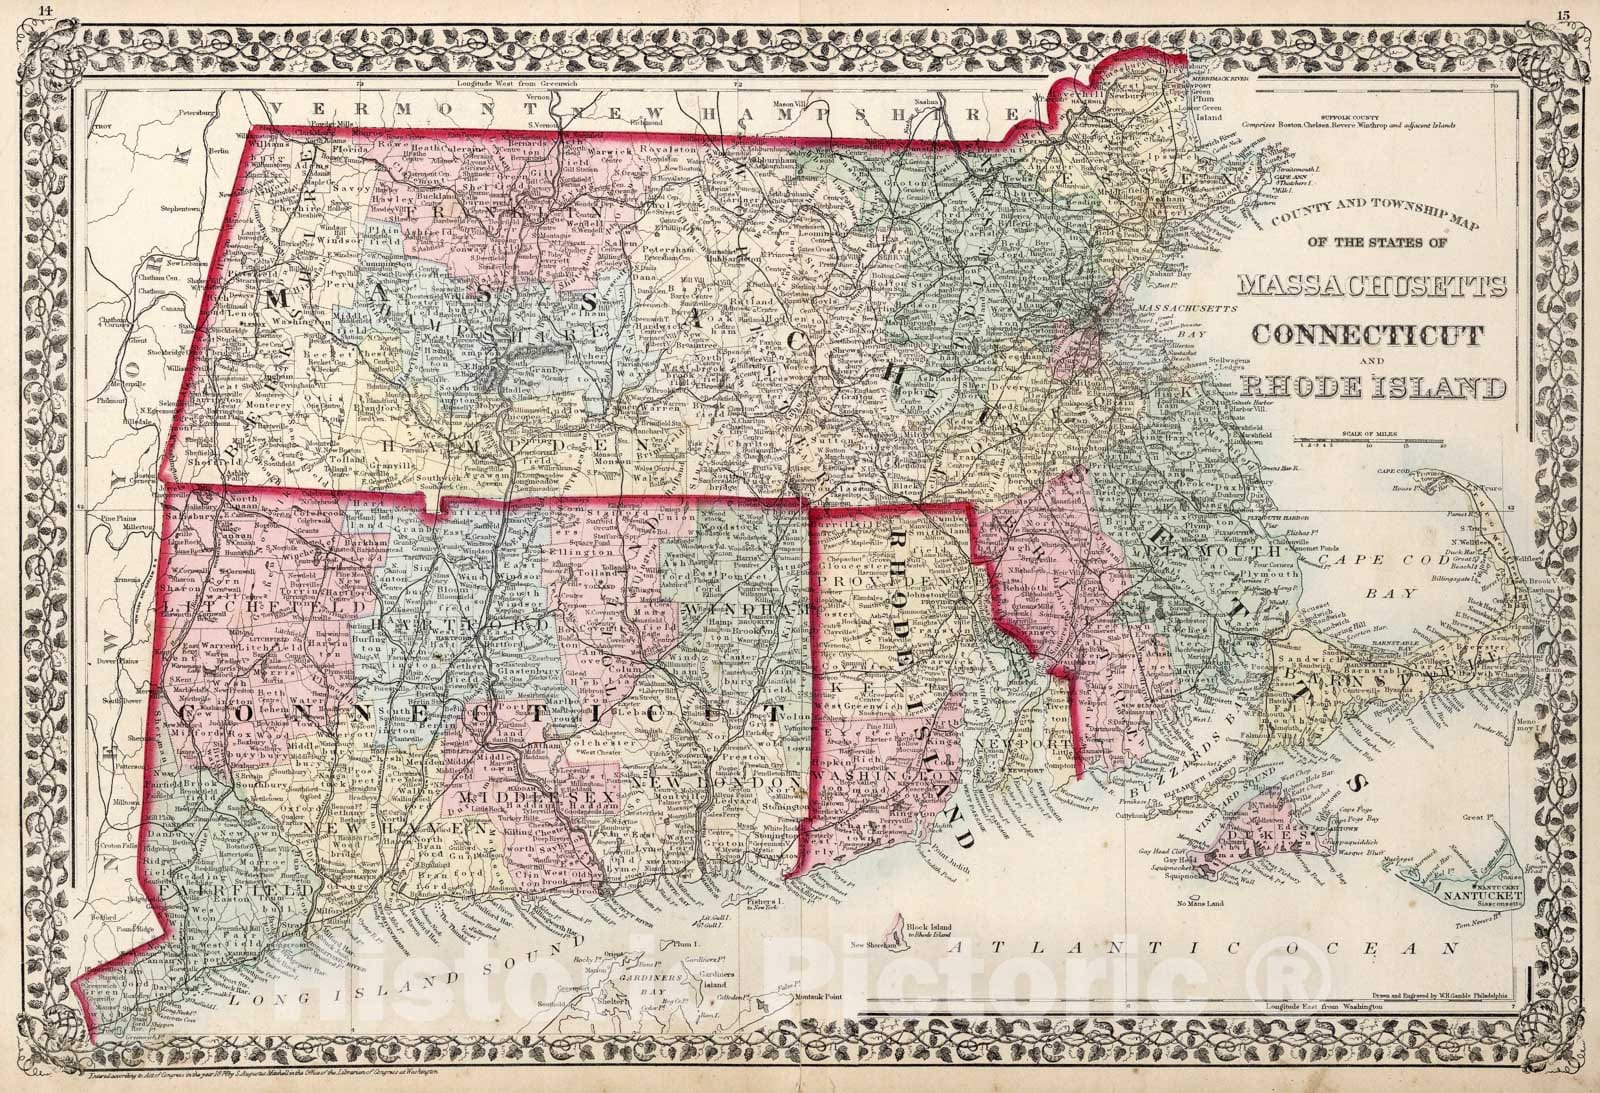 Historic Map : County and township map of the states of Massachusetts, Connecticut and Rhode Island, 1874, Vintage Wall Art